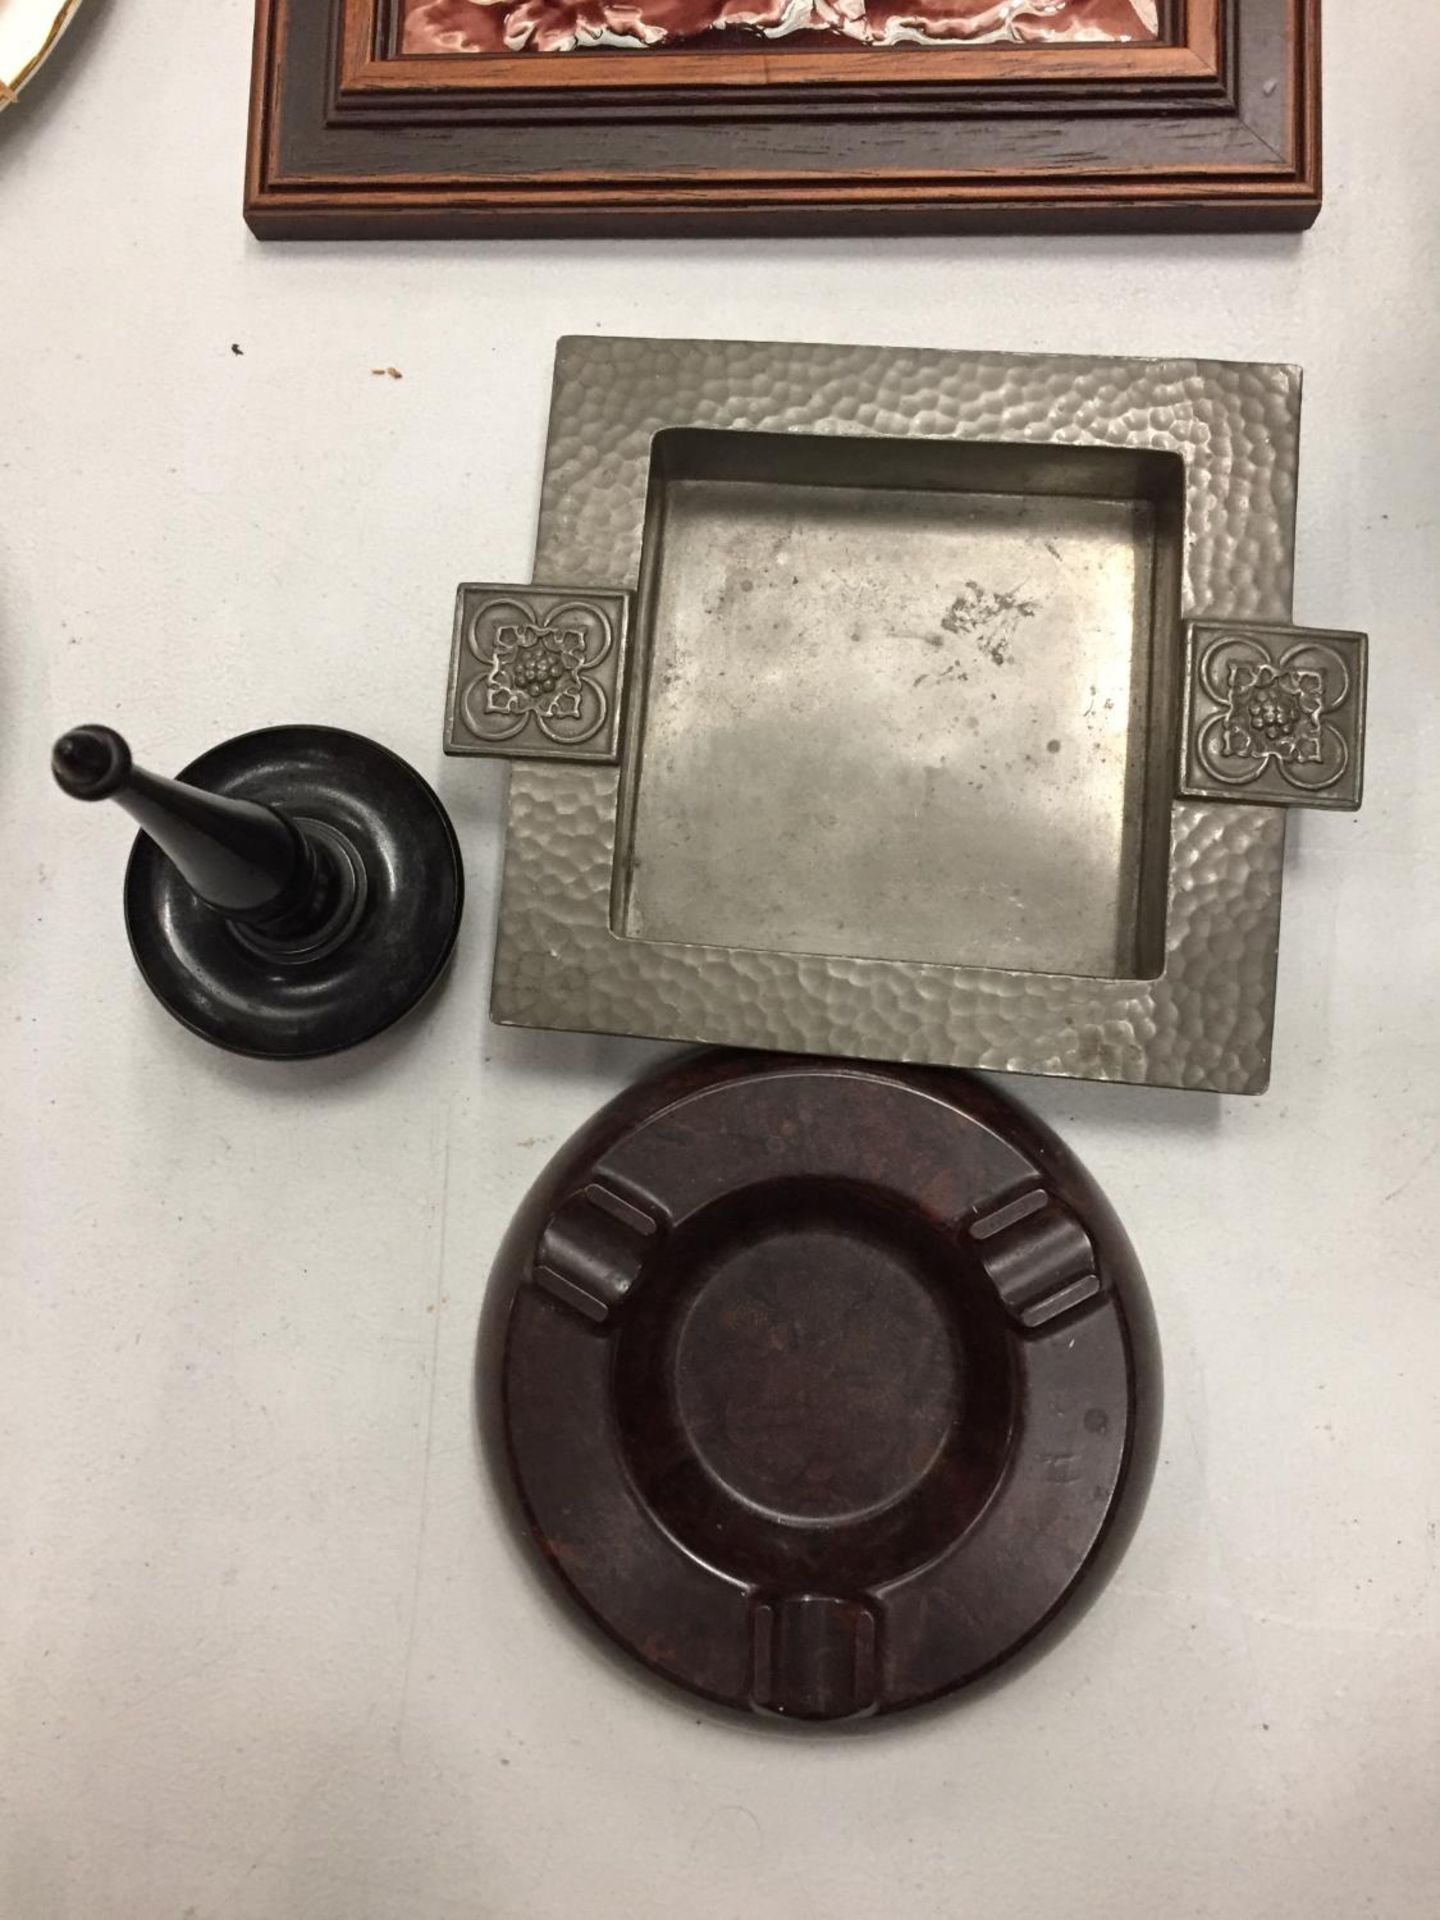 TWO ASH TRAYS AND A RING HOLDER, ONE ASH TRAY IS PEWTER